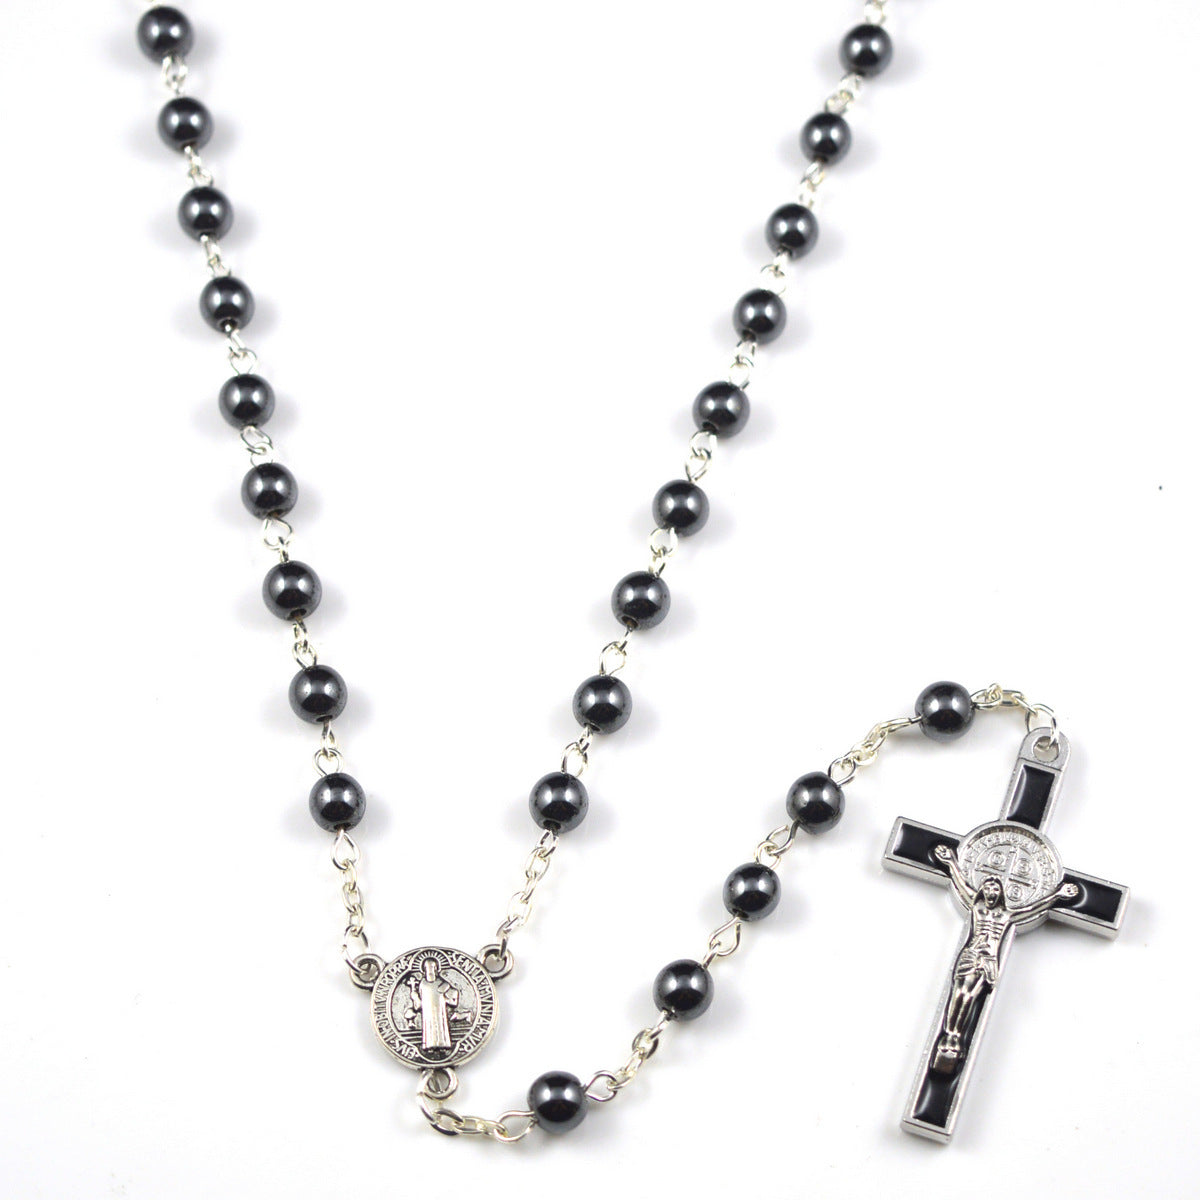 Black rosary necklace religious necklace